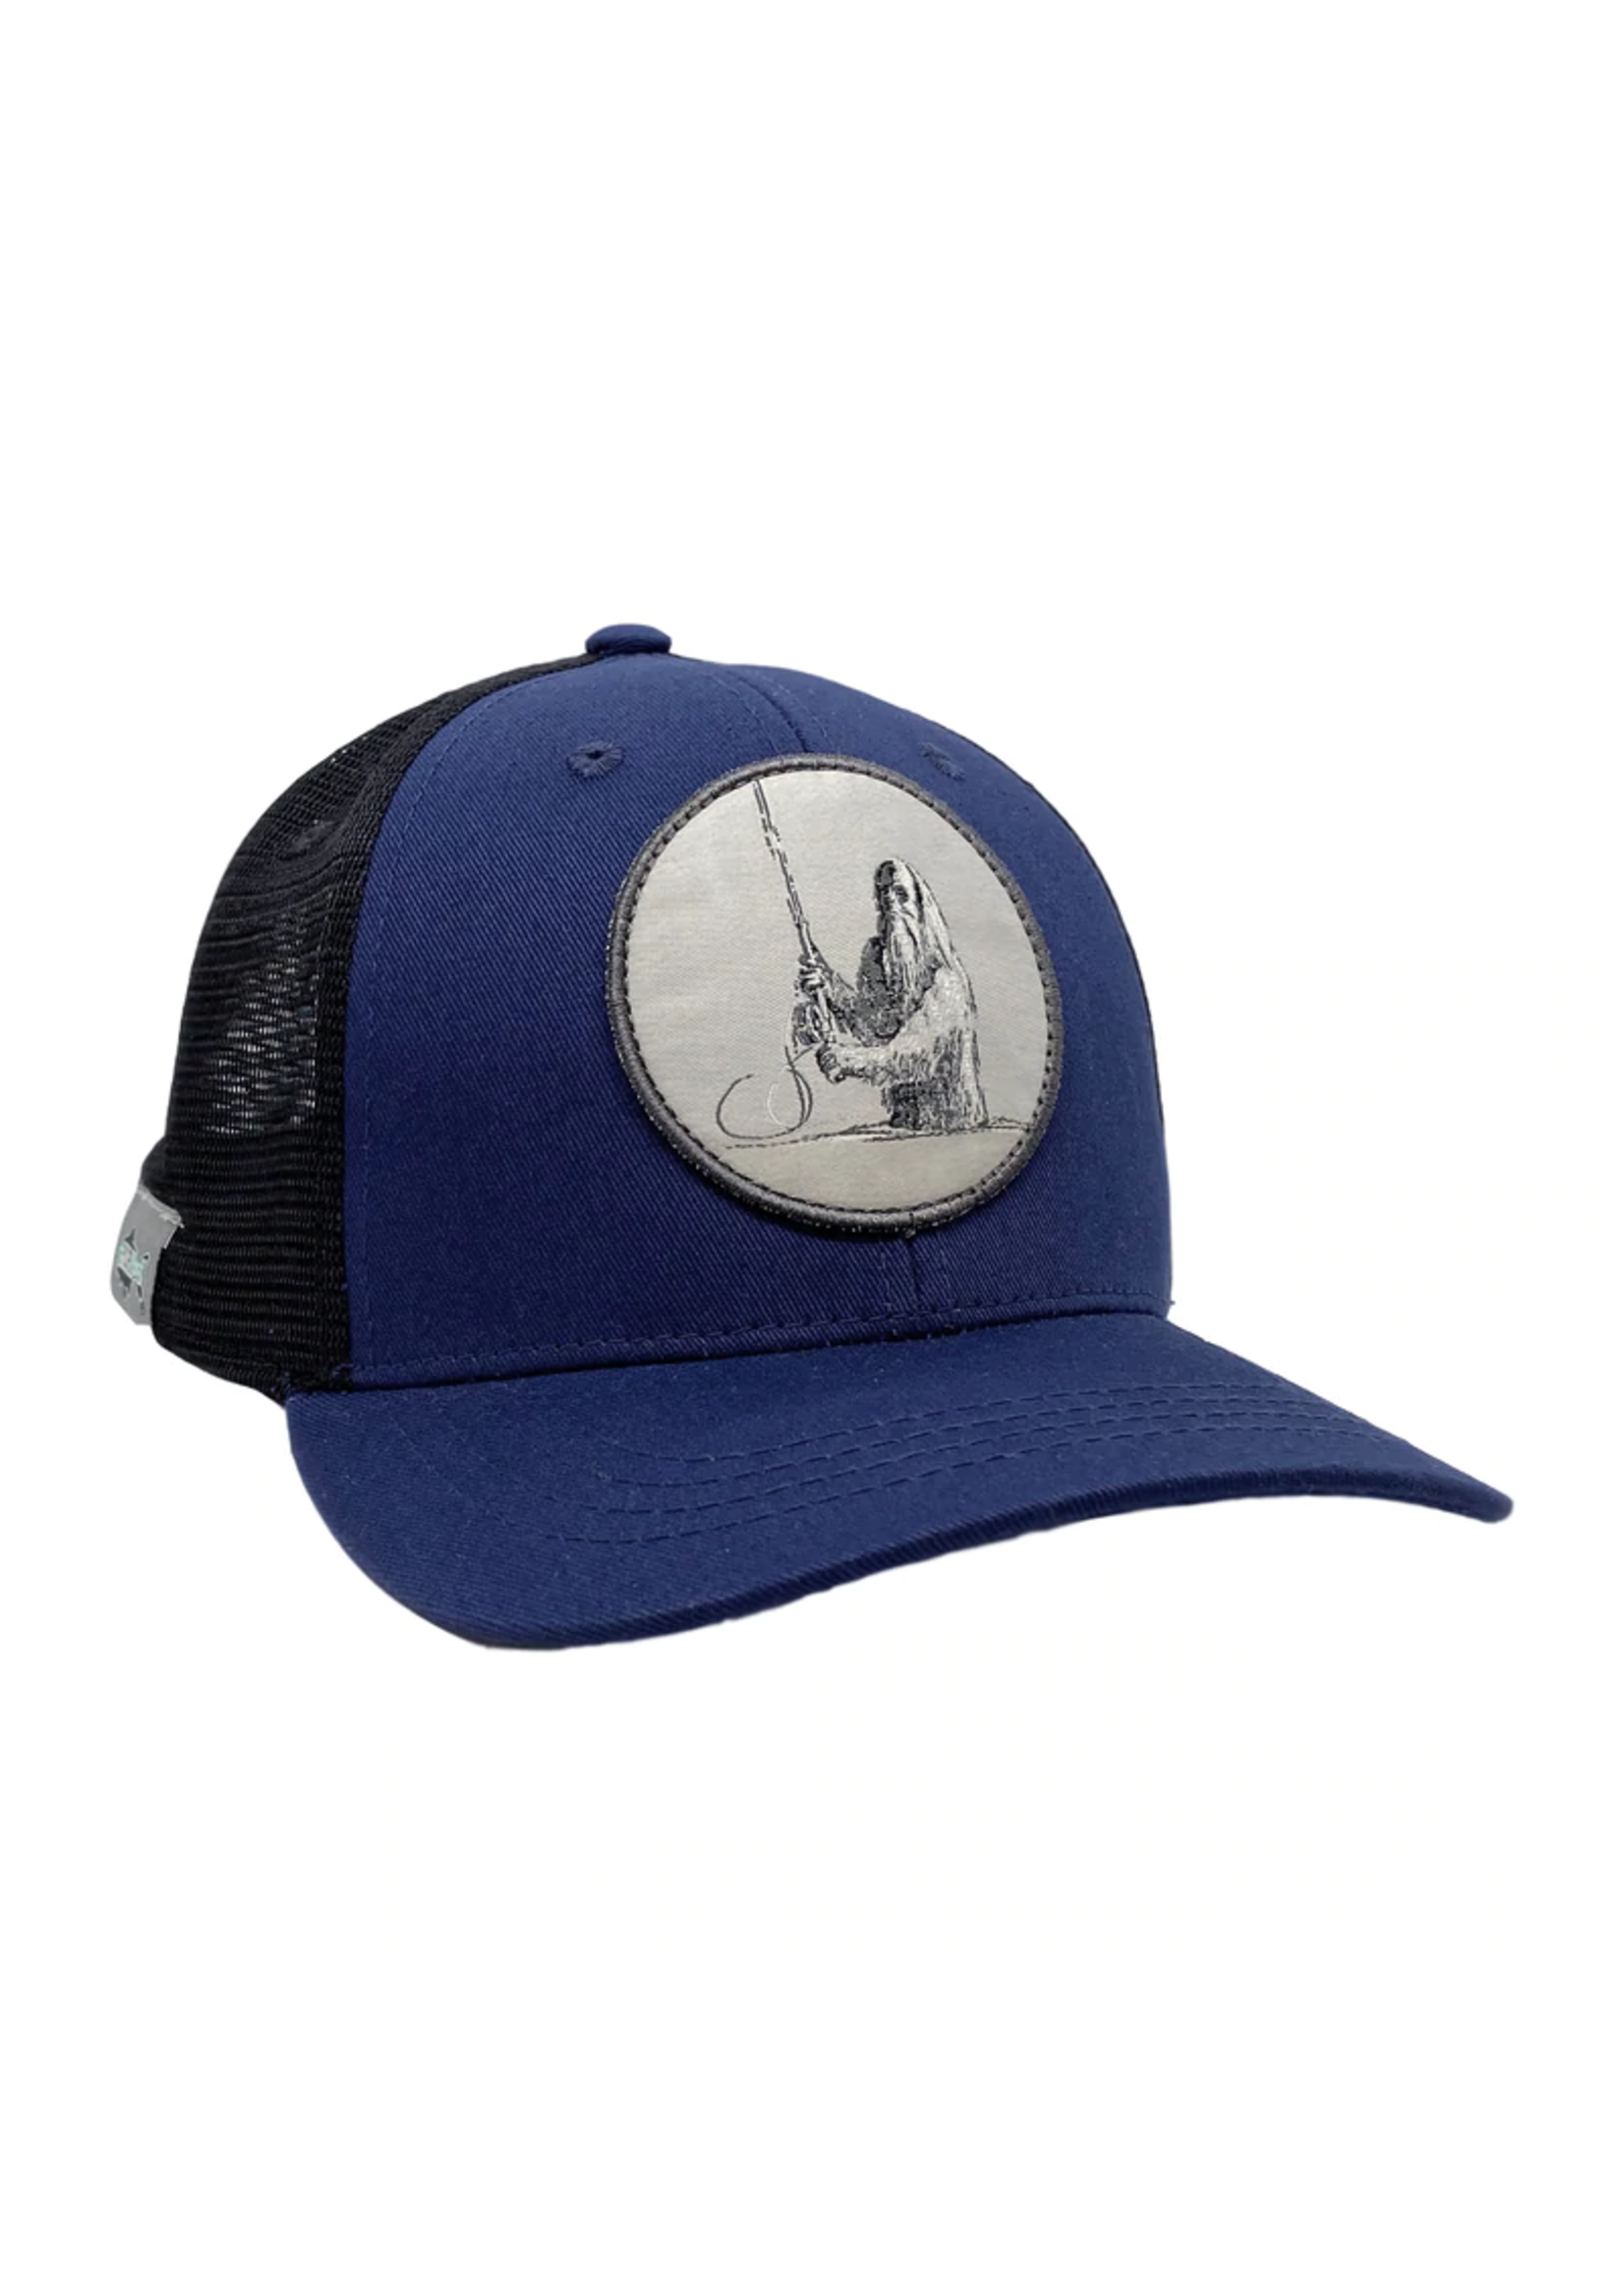 Rep Your Water RepYourWater Swing. Squatch. Repeat. Hat